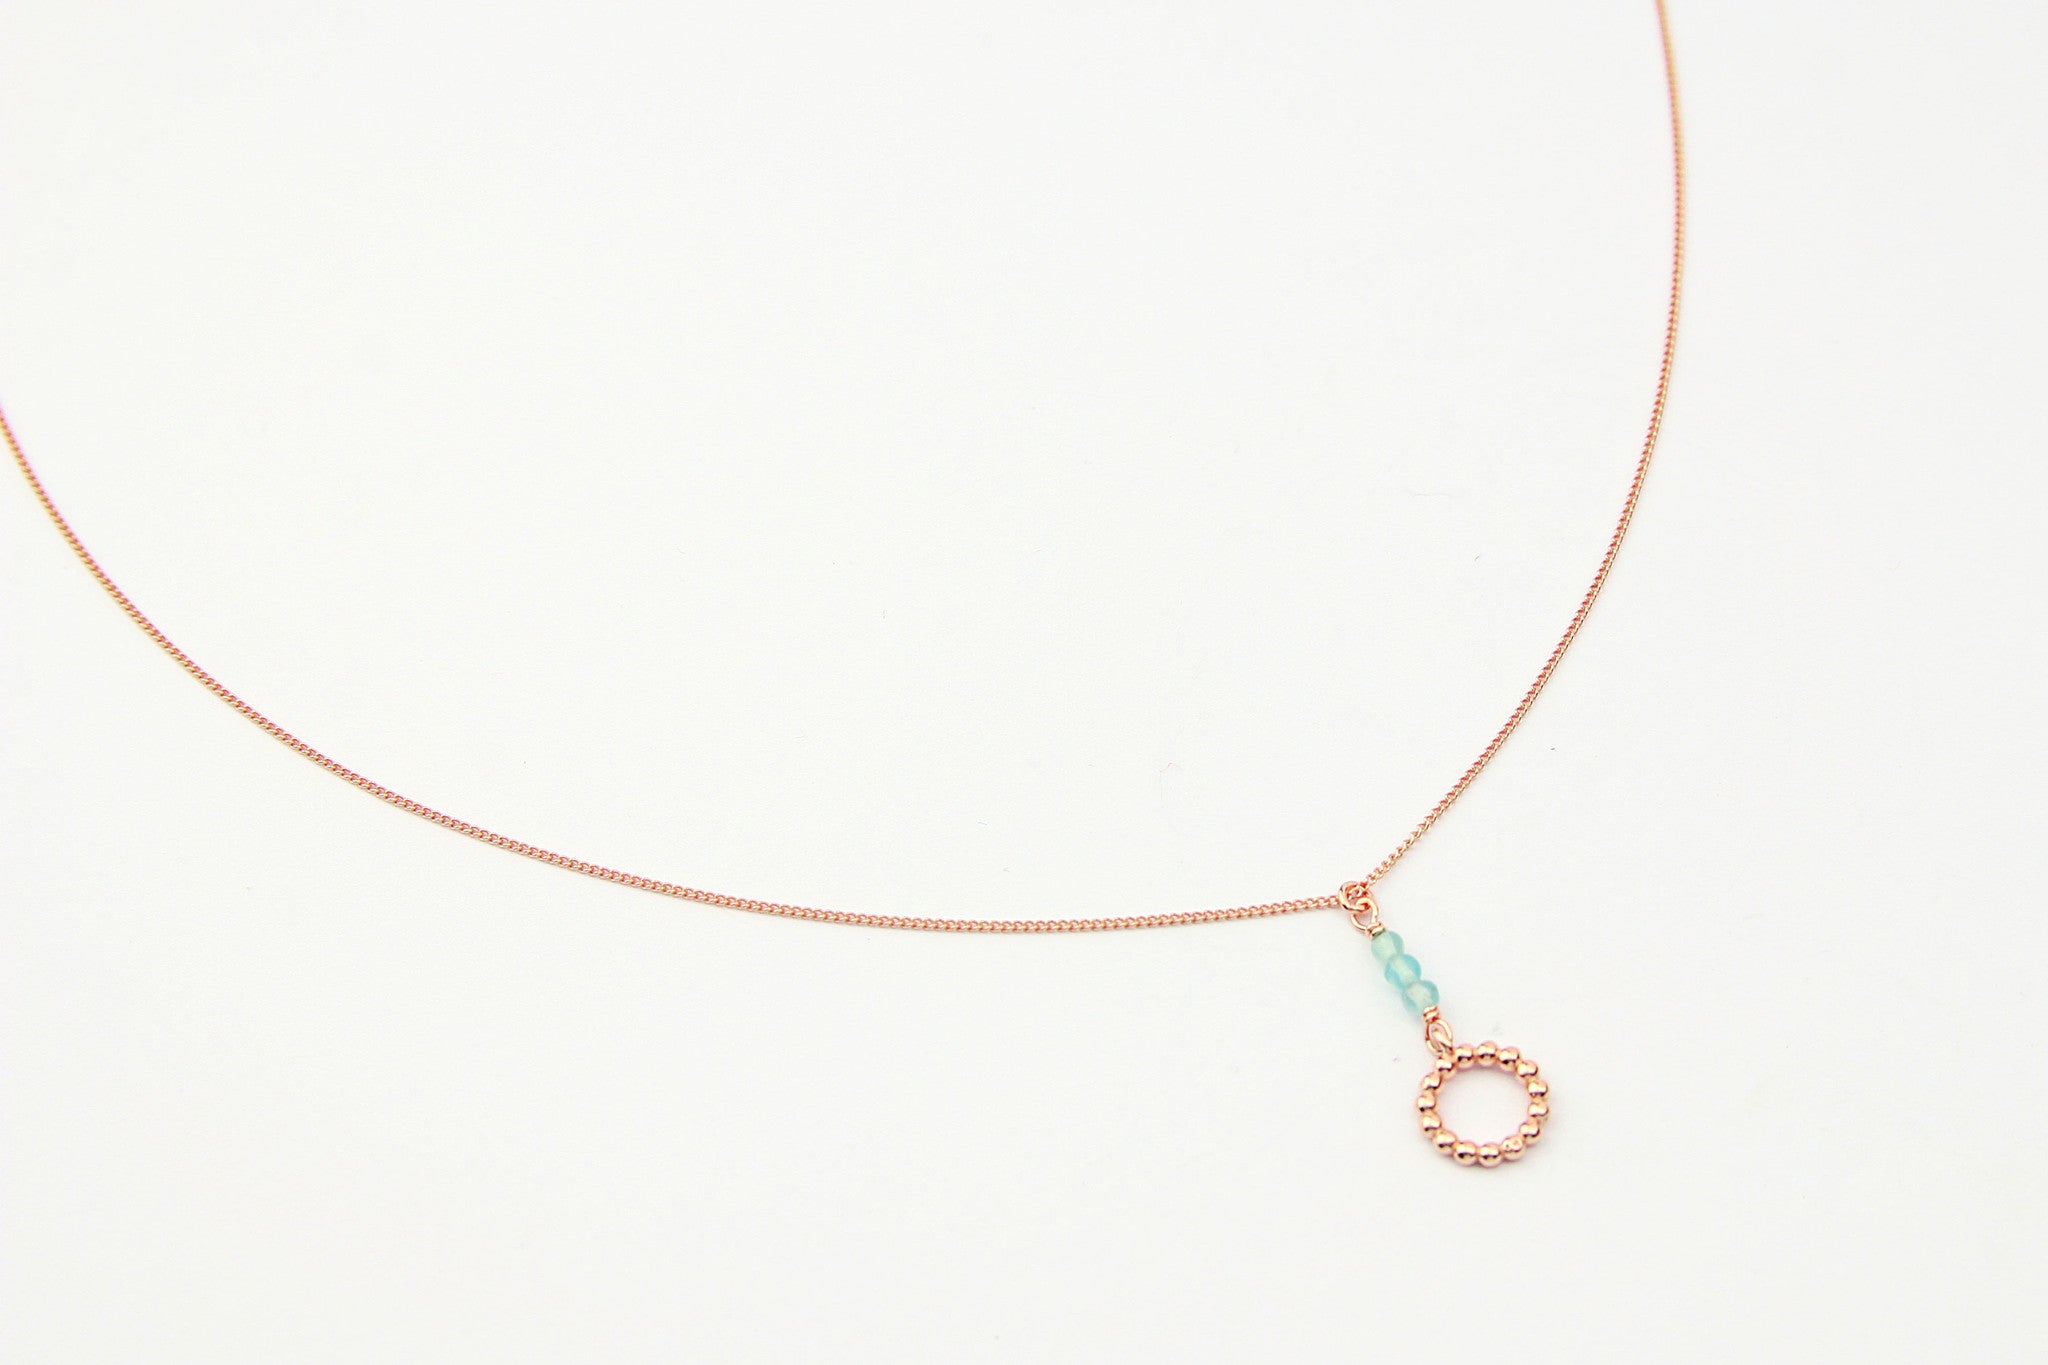 fine jewelry handmade with love fairtrade jewelberry necklace kette medium pearls bleu rose gold plated sterling silver